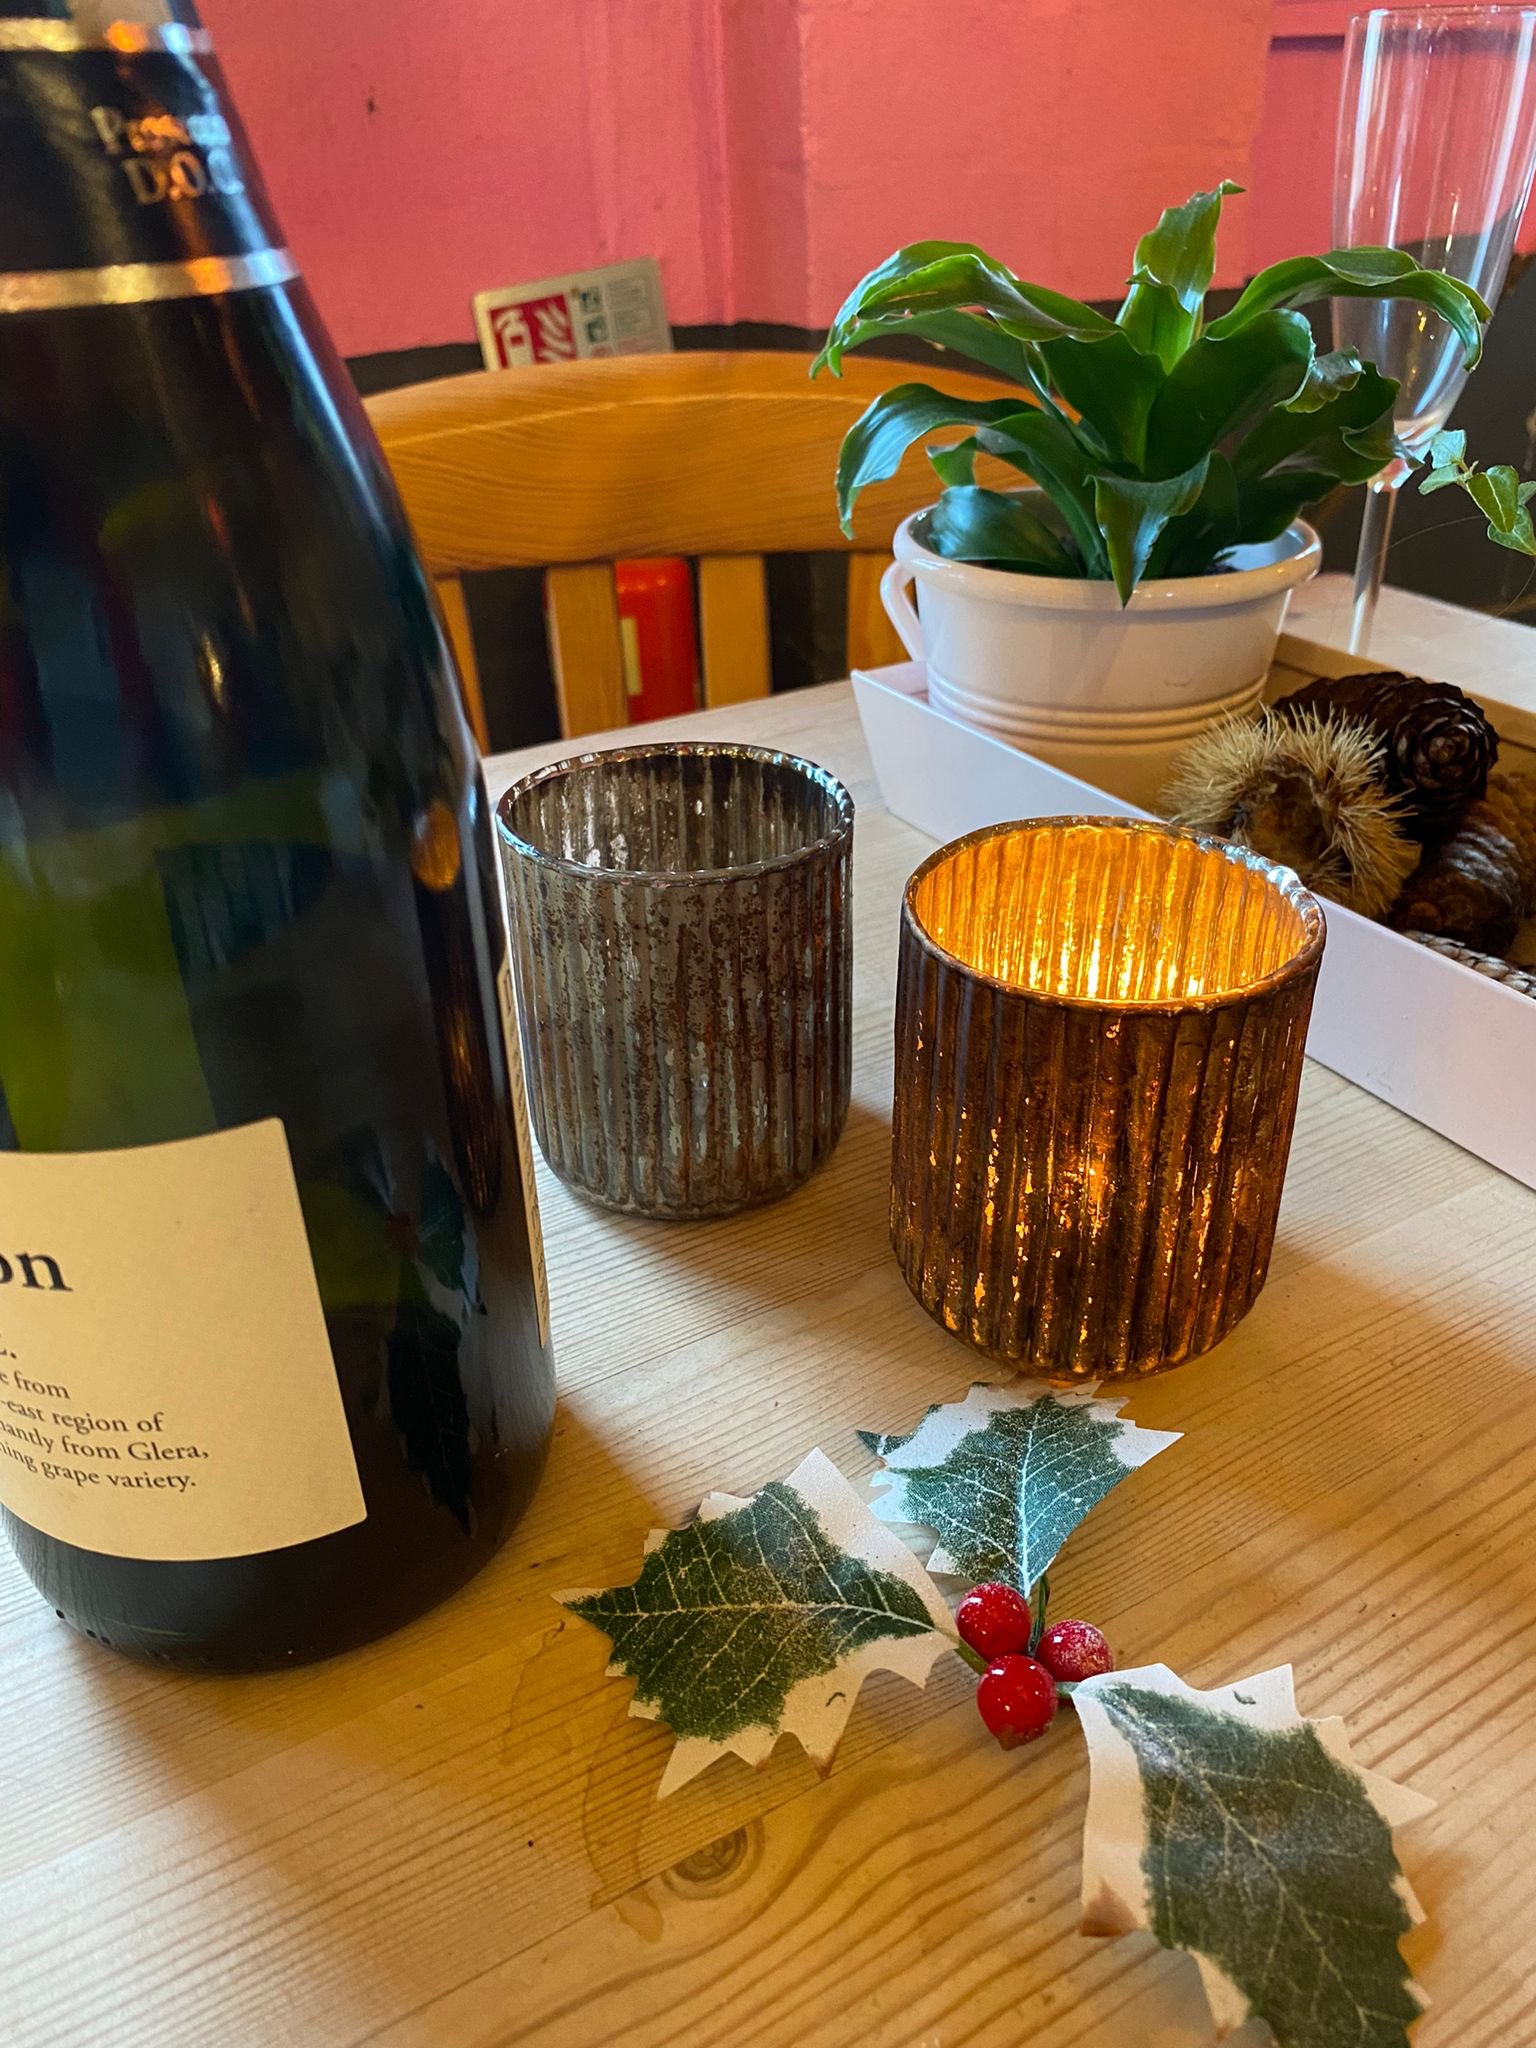 Add a glass of fizz for an extra special Christmas lunch